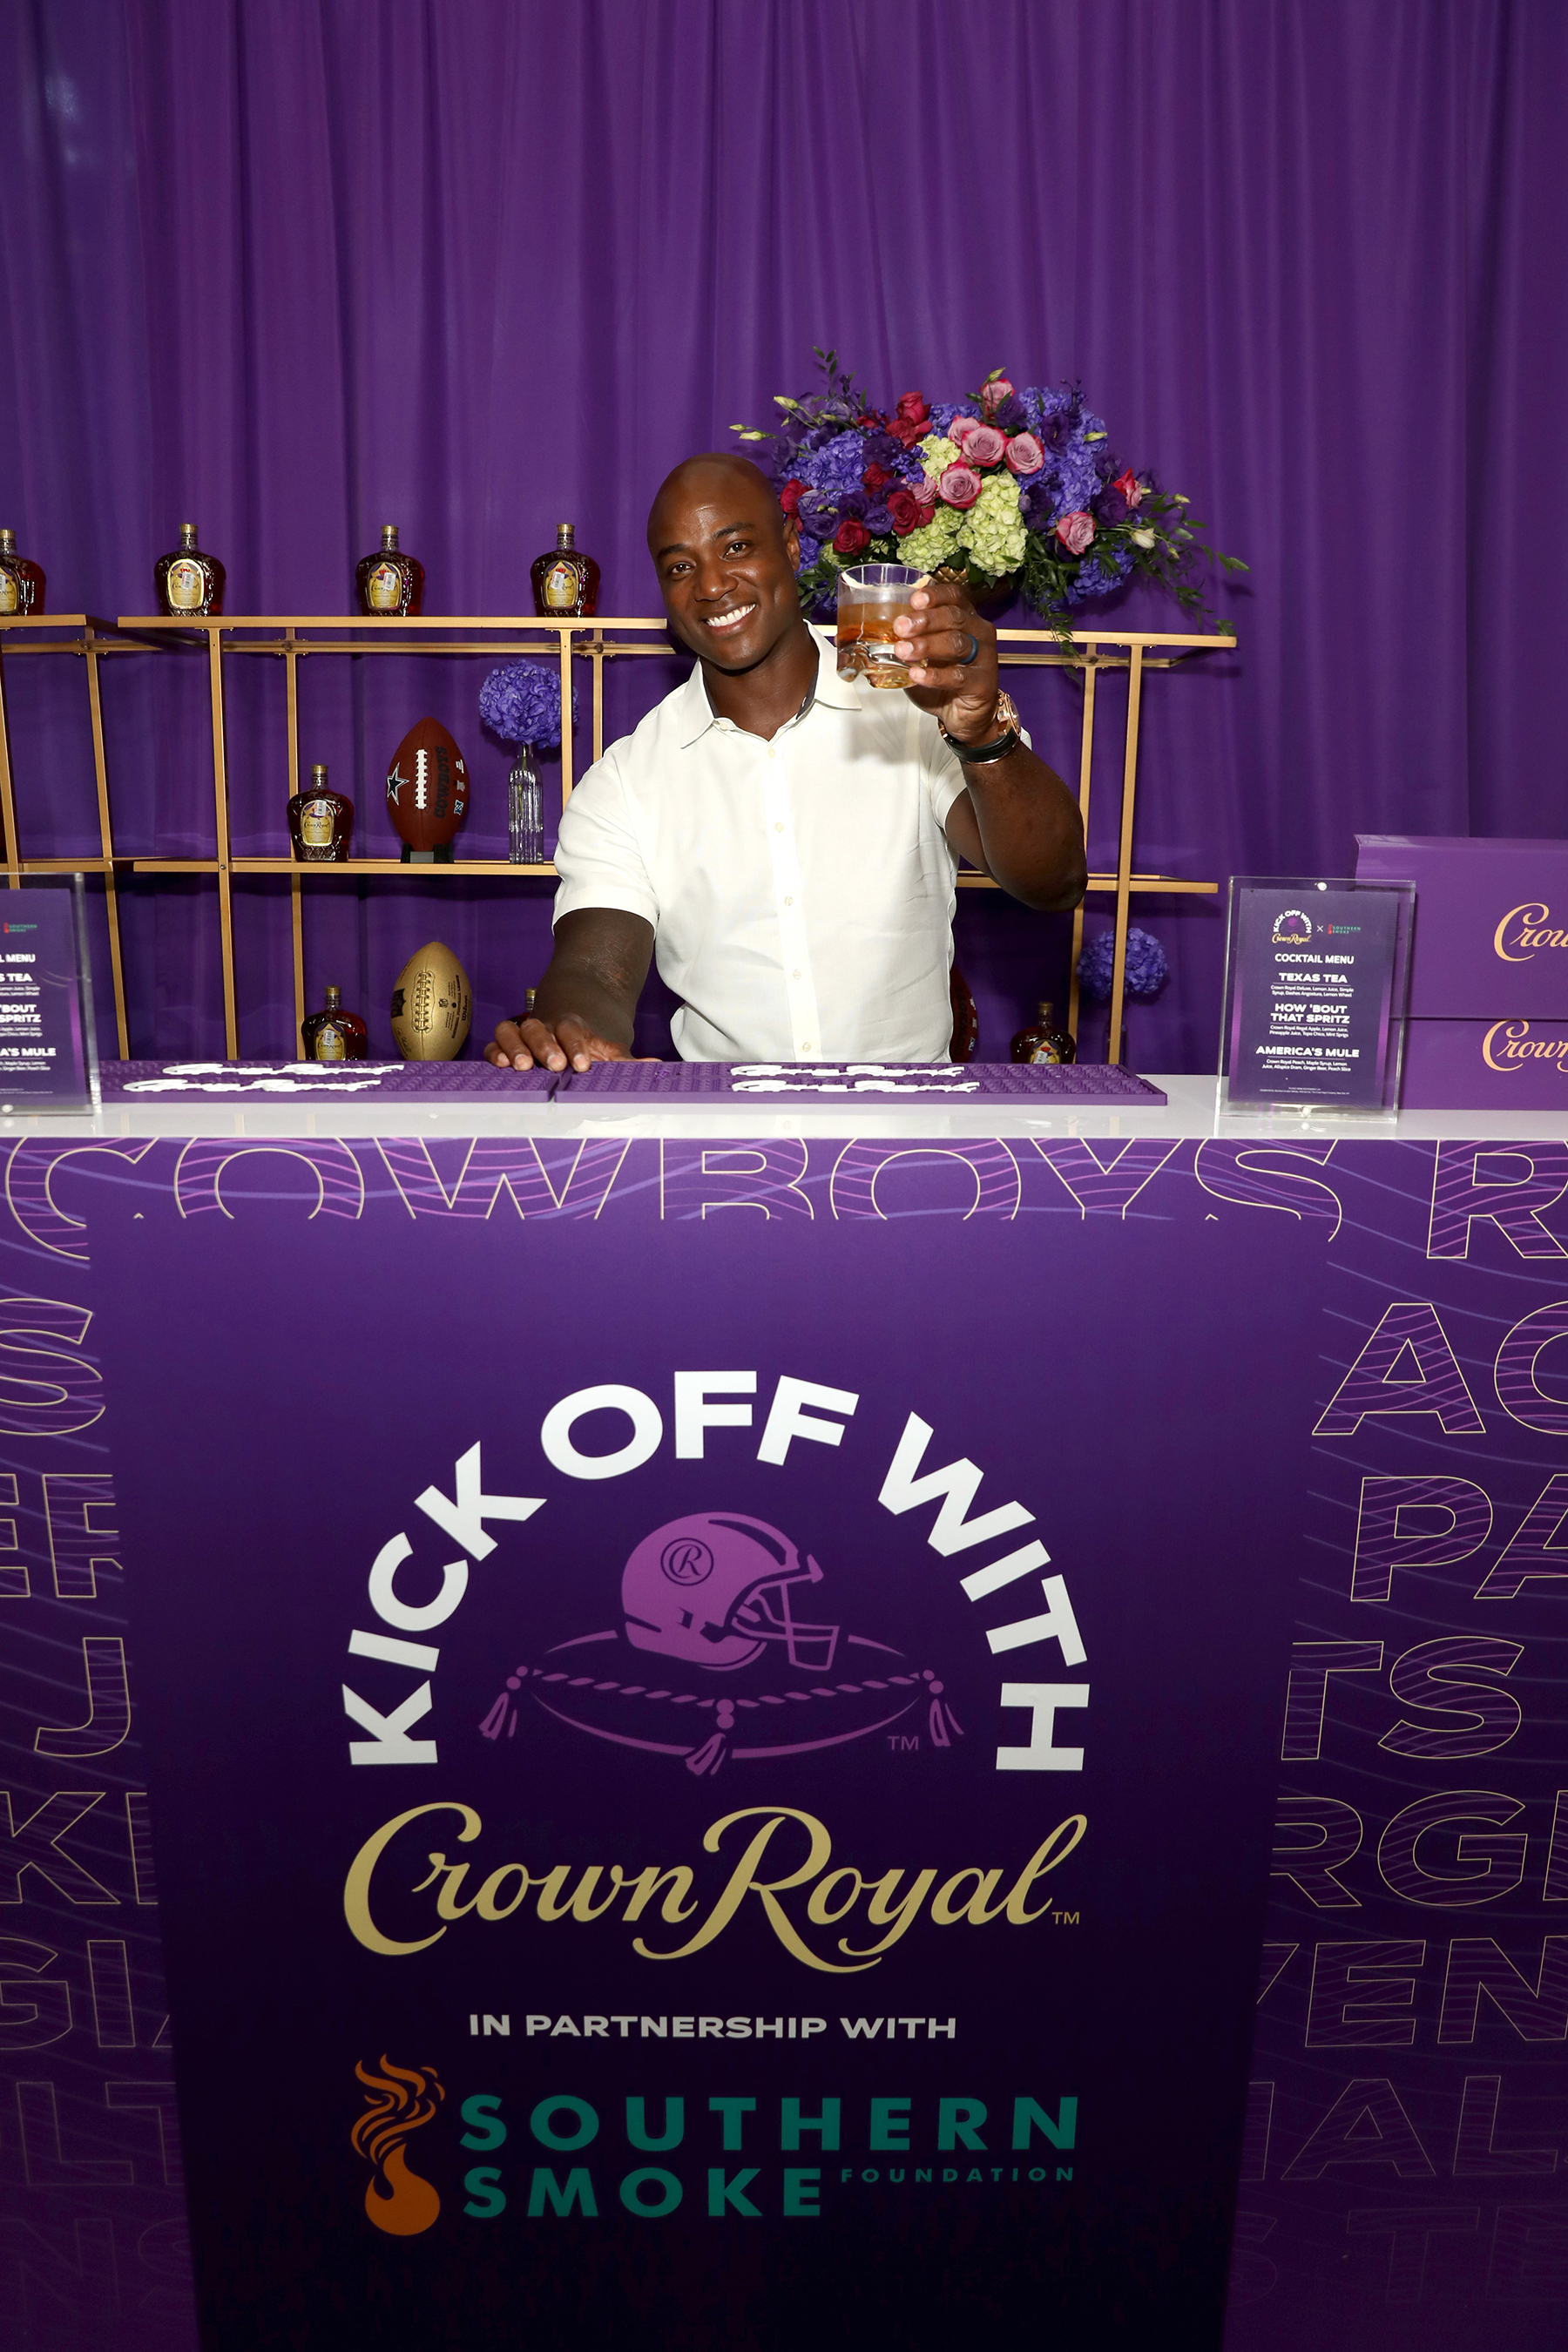 Dallas Cowboys legend DeMarcus Ware joins Crown Royal to support hospitality workers during the brand’s ‘Kick Off with Crown Royal’ event at AT&T Stadium on Wednesday, September 8.